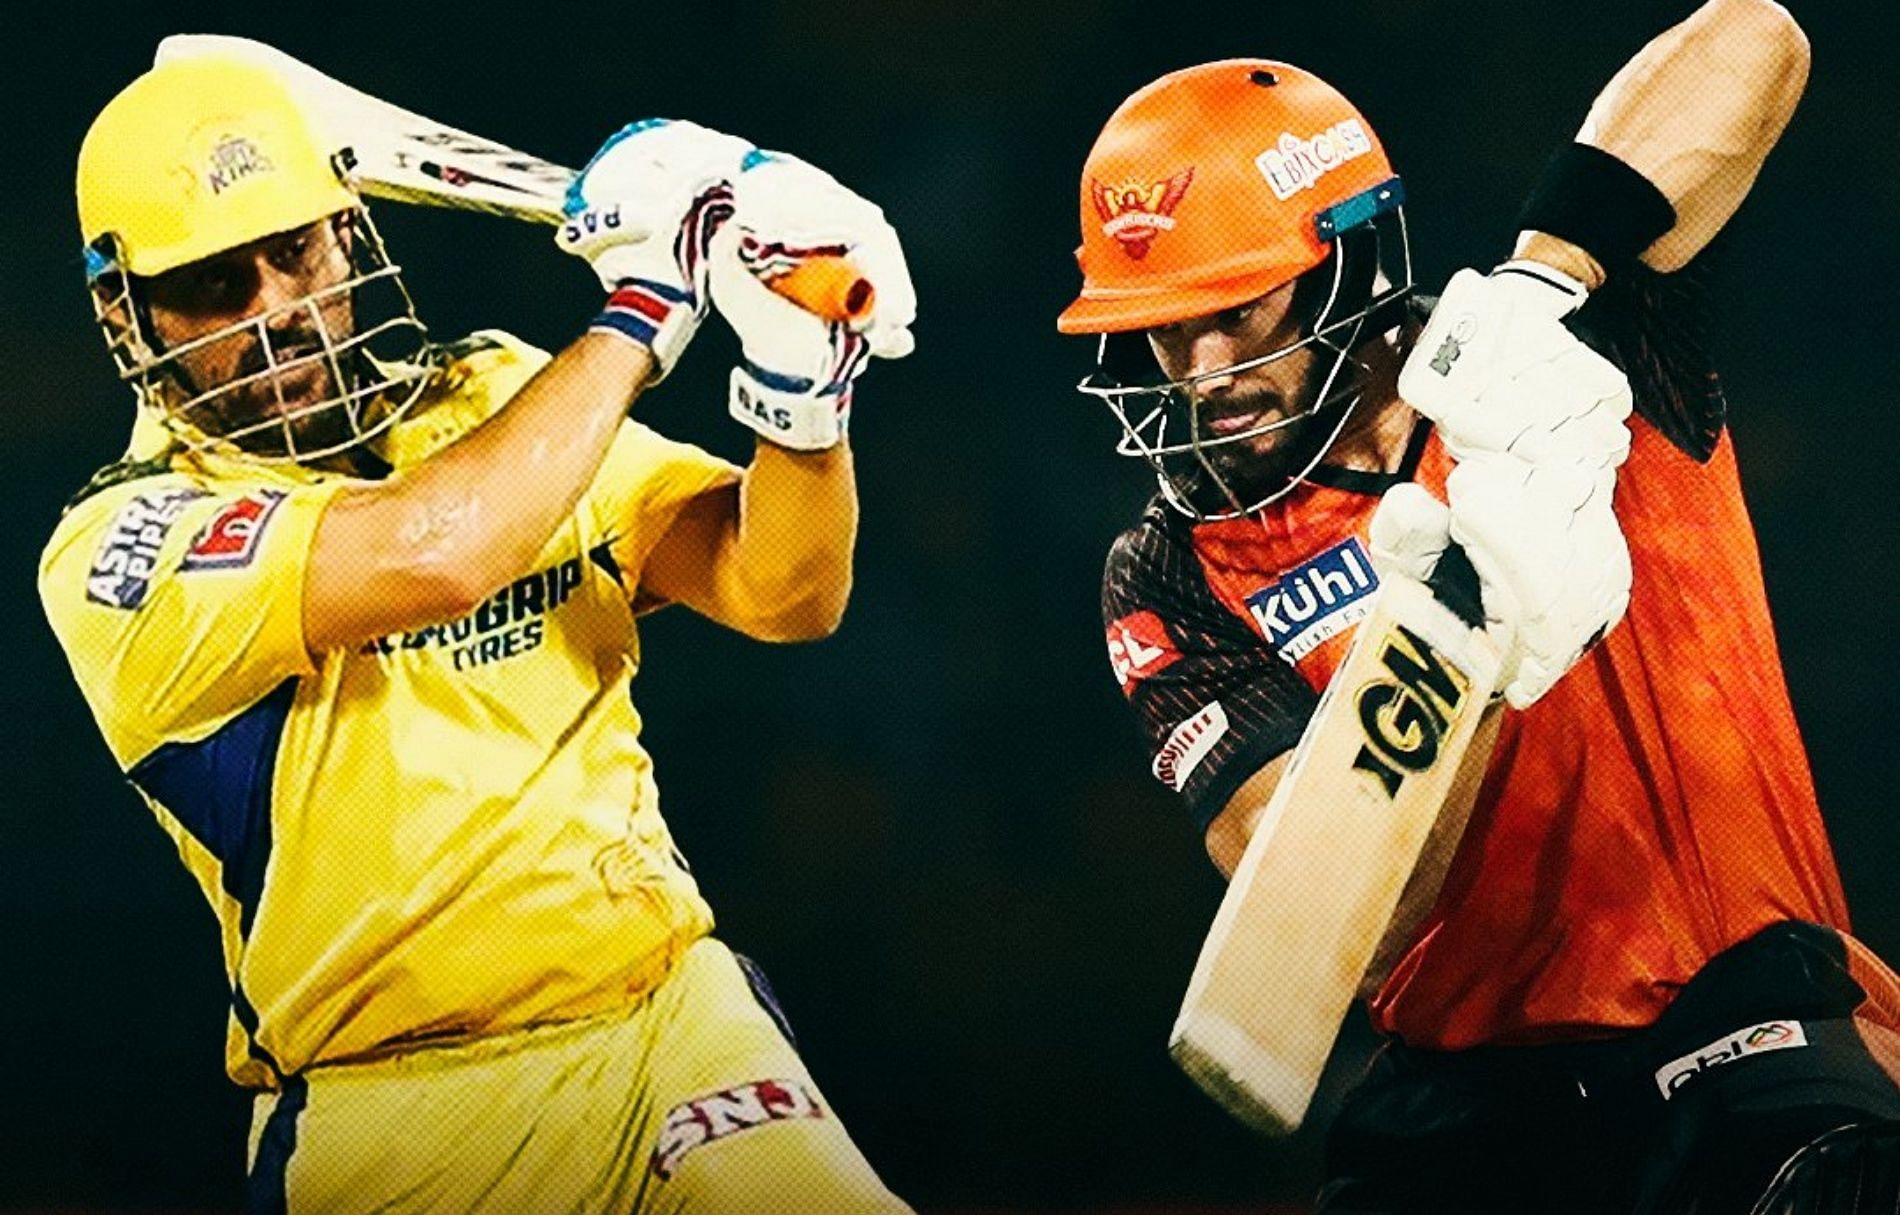 CSK vs SRH, IPL 2023 Toss result and playing 11s for today's match